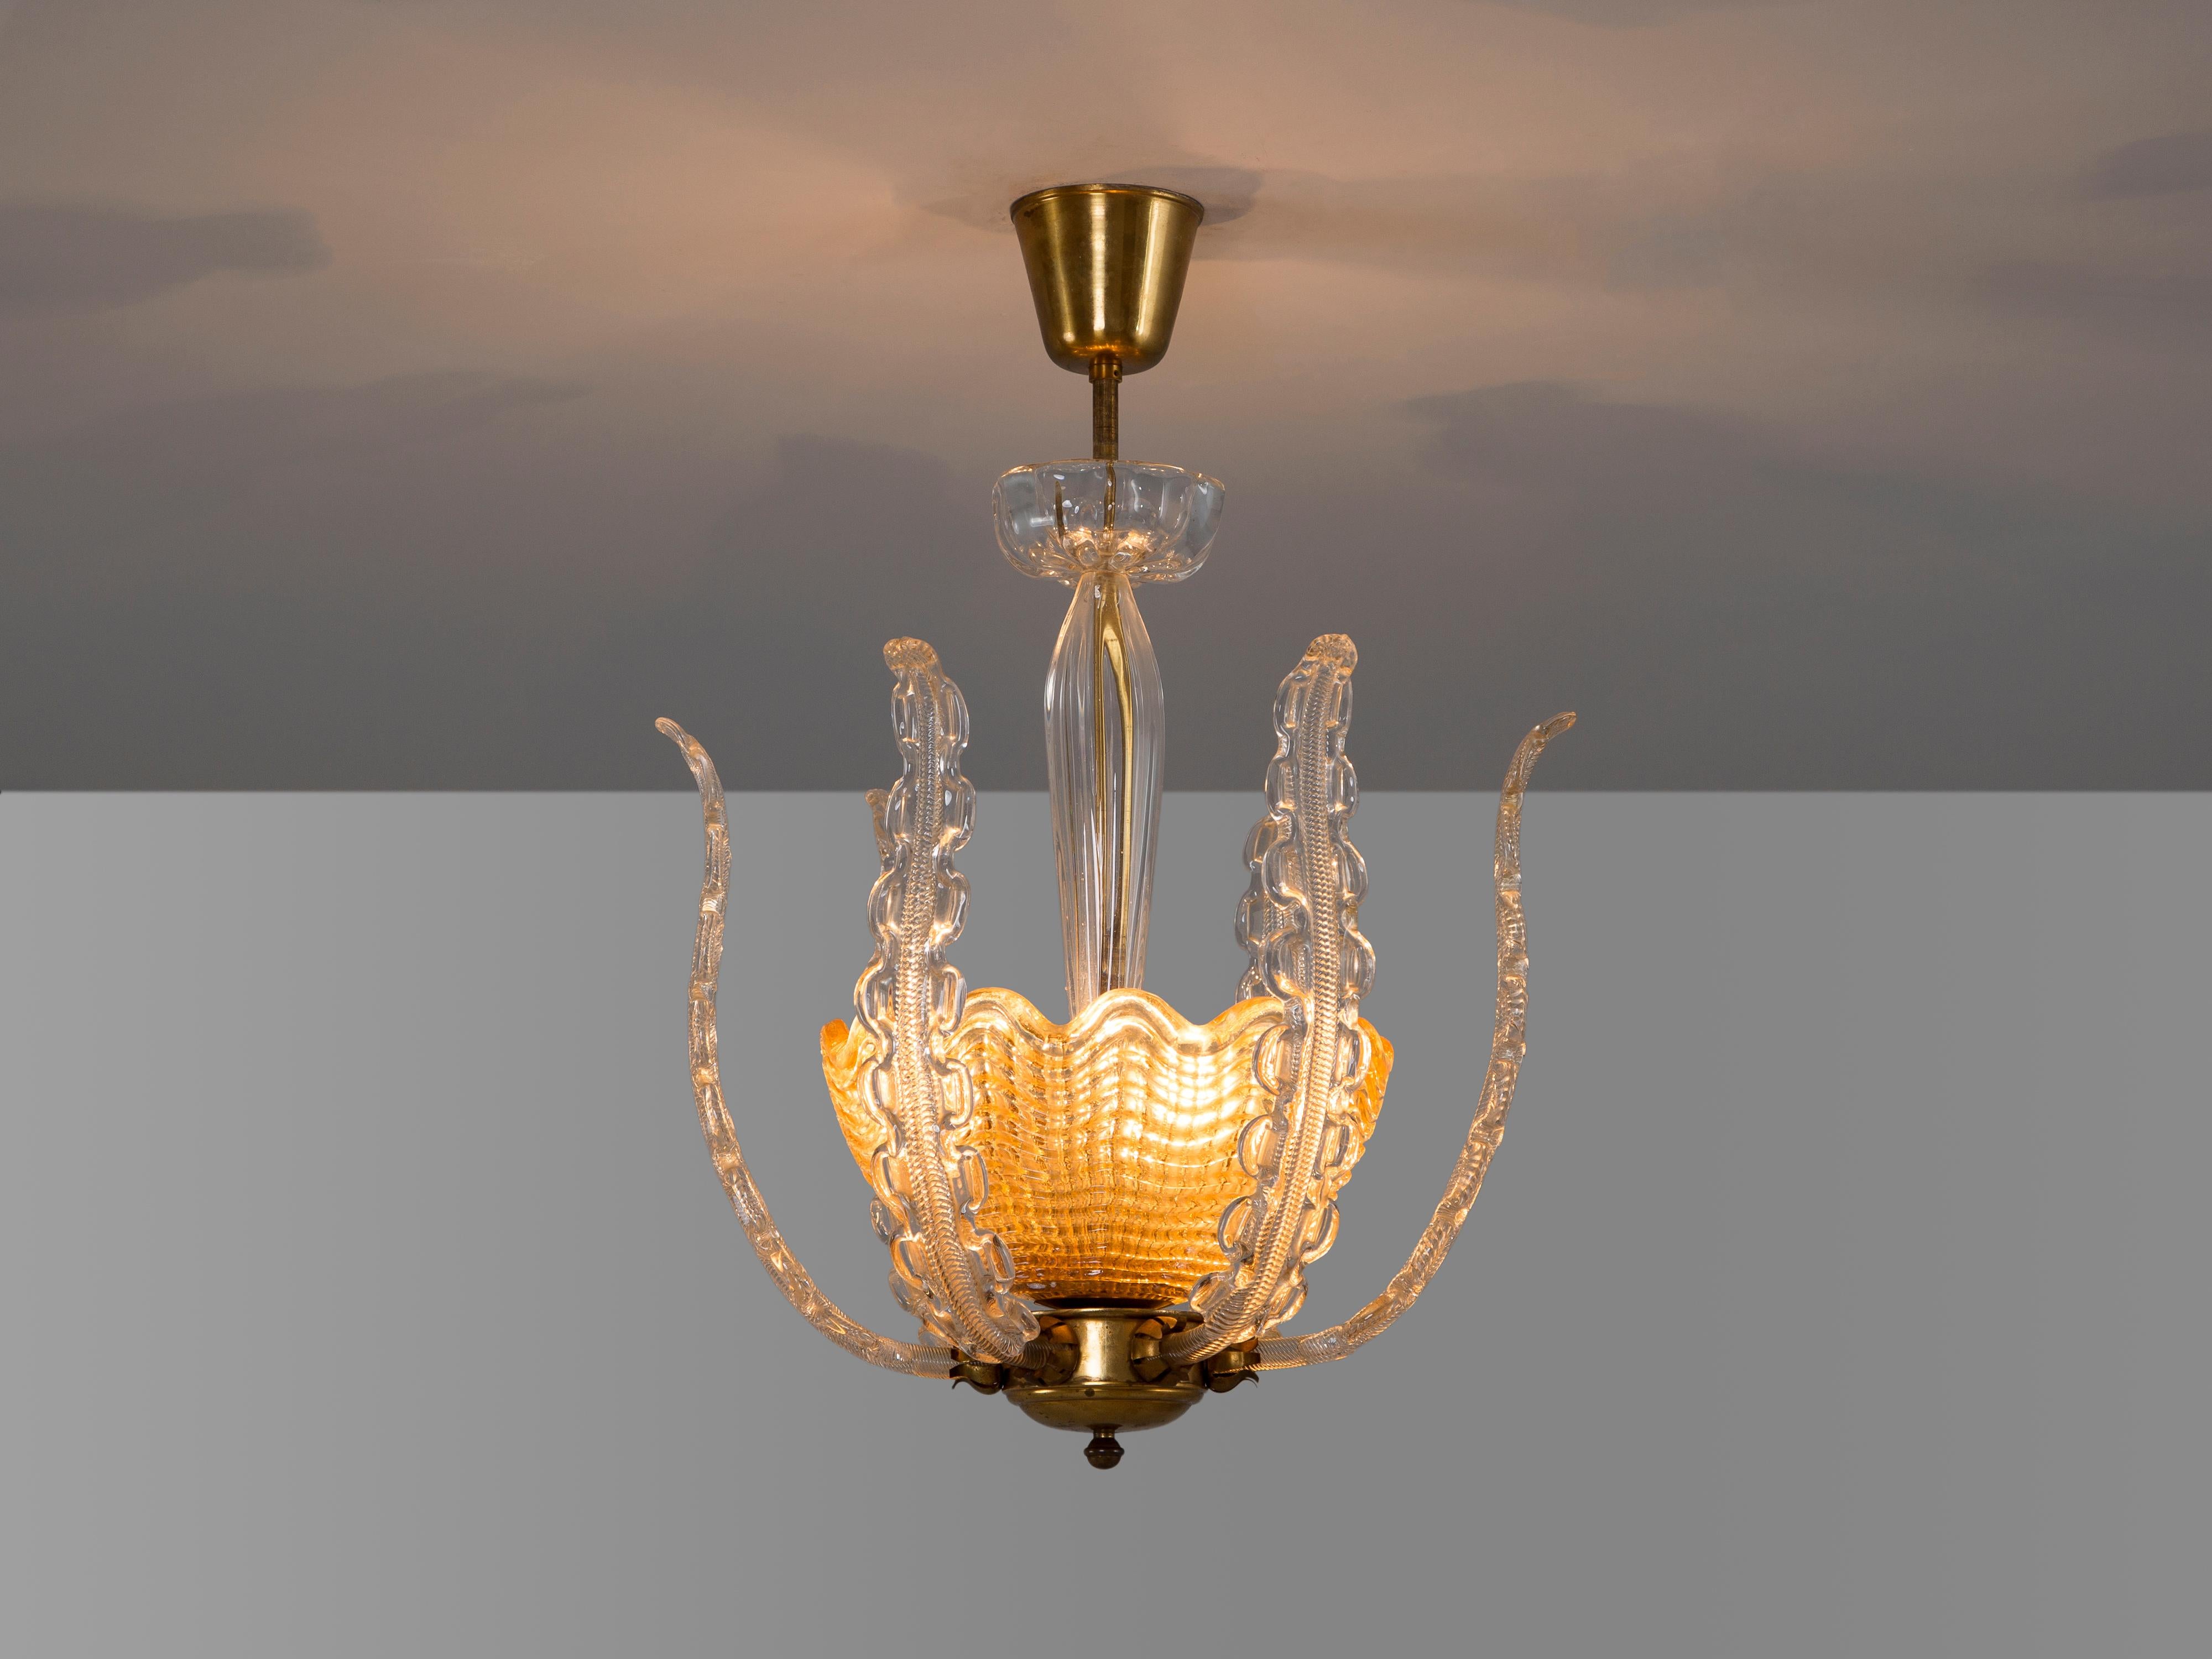 Chandelier, in brass and glass, by Carl Fagerlund for Orrefors, Sweden, 1940s.

Royal chandelier in structured glass and brass. The light consist of a structured glass bowl with six long glass leaves or 'tentacles'. The combination of the brass